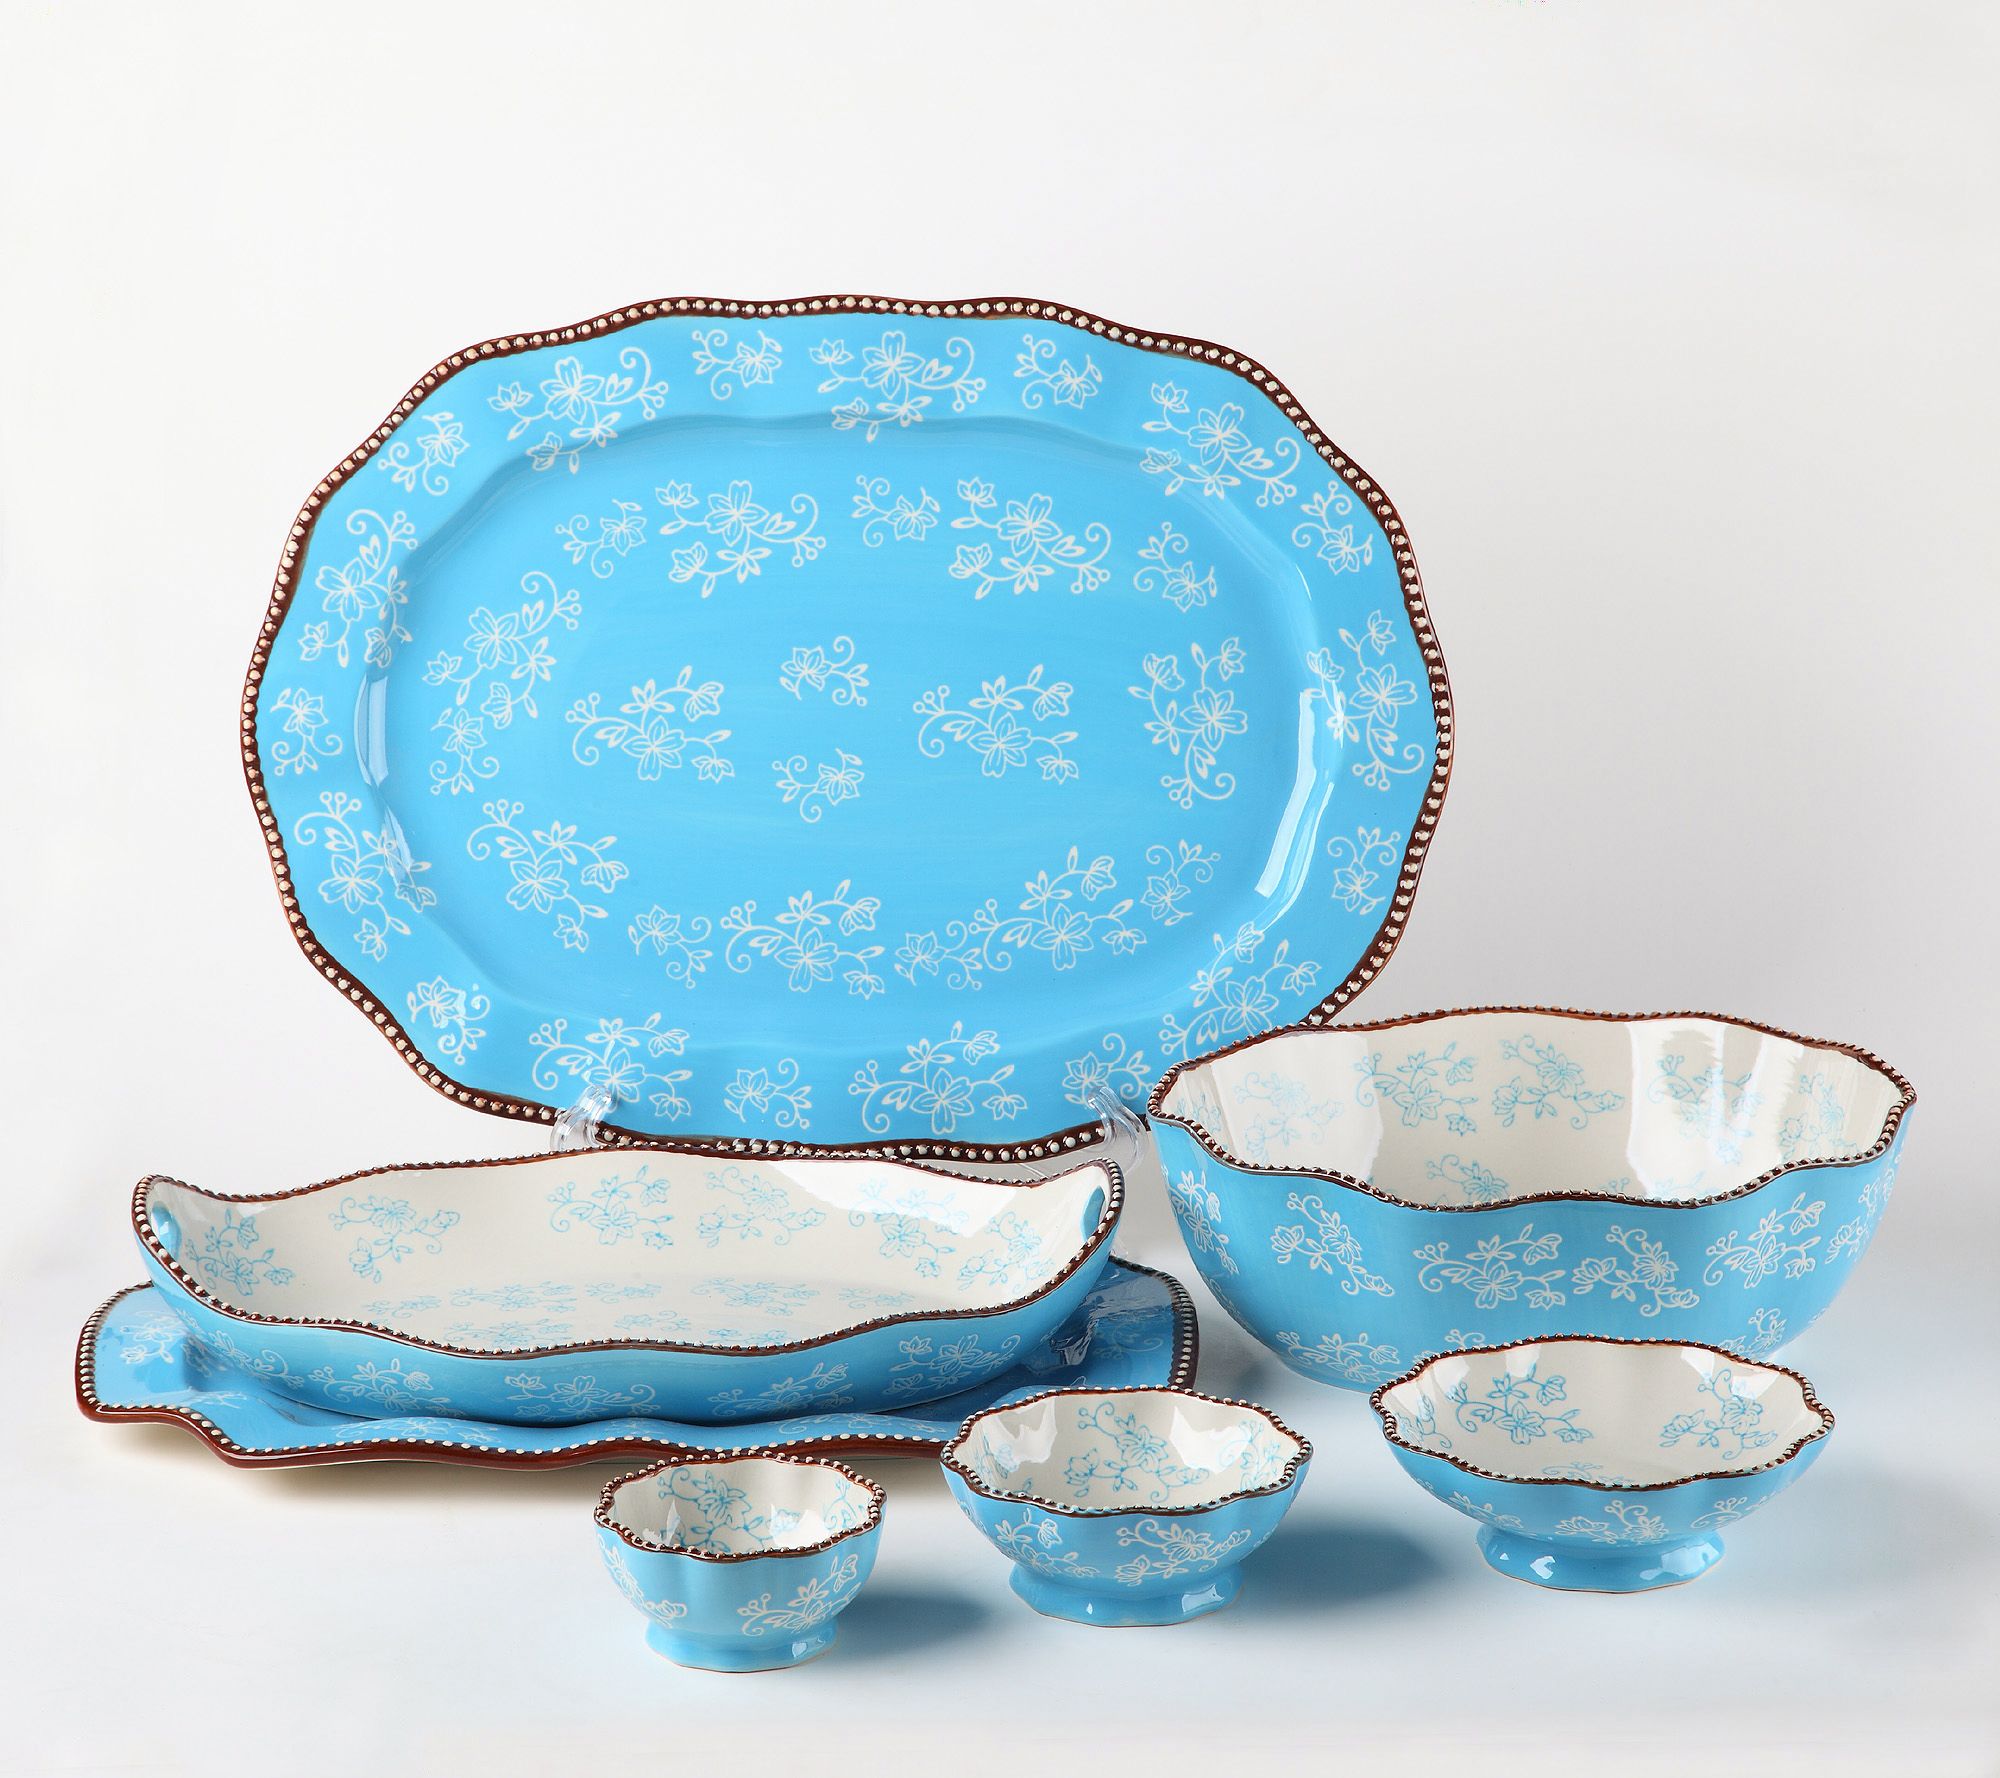 Martha Stewart Collection 8-Pc. Bowl & Lid Set, Created for Macy's - Macy's